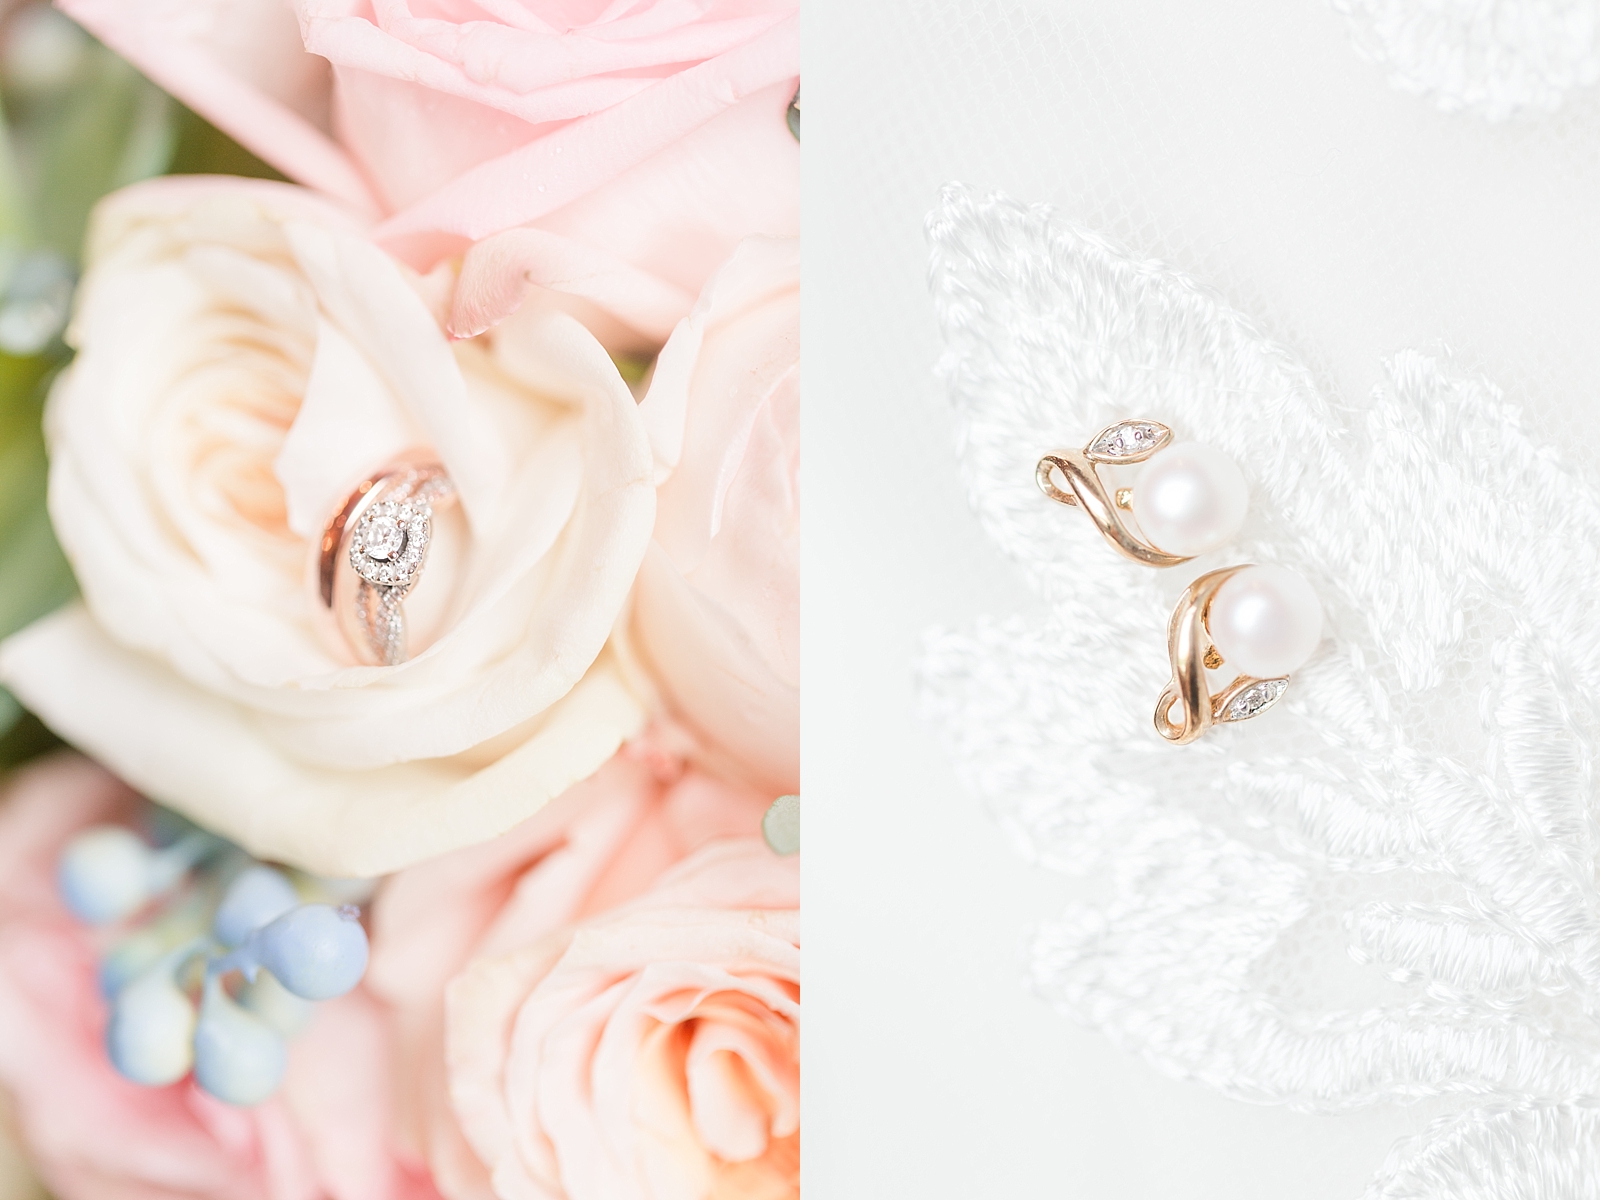 Black Fox Farms Wedding Ring in Flowers and Brides Earring Detail Photos